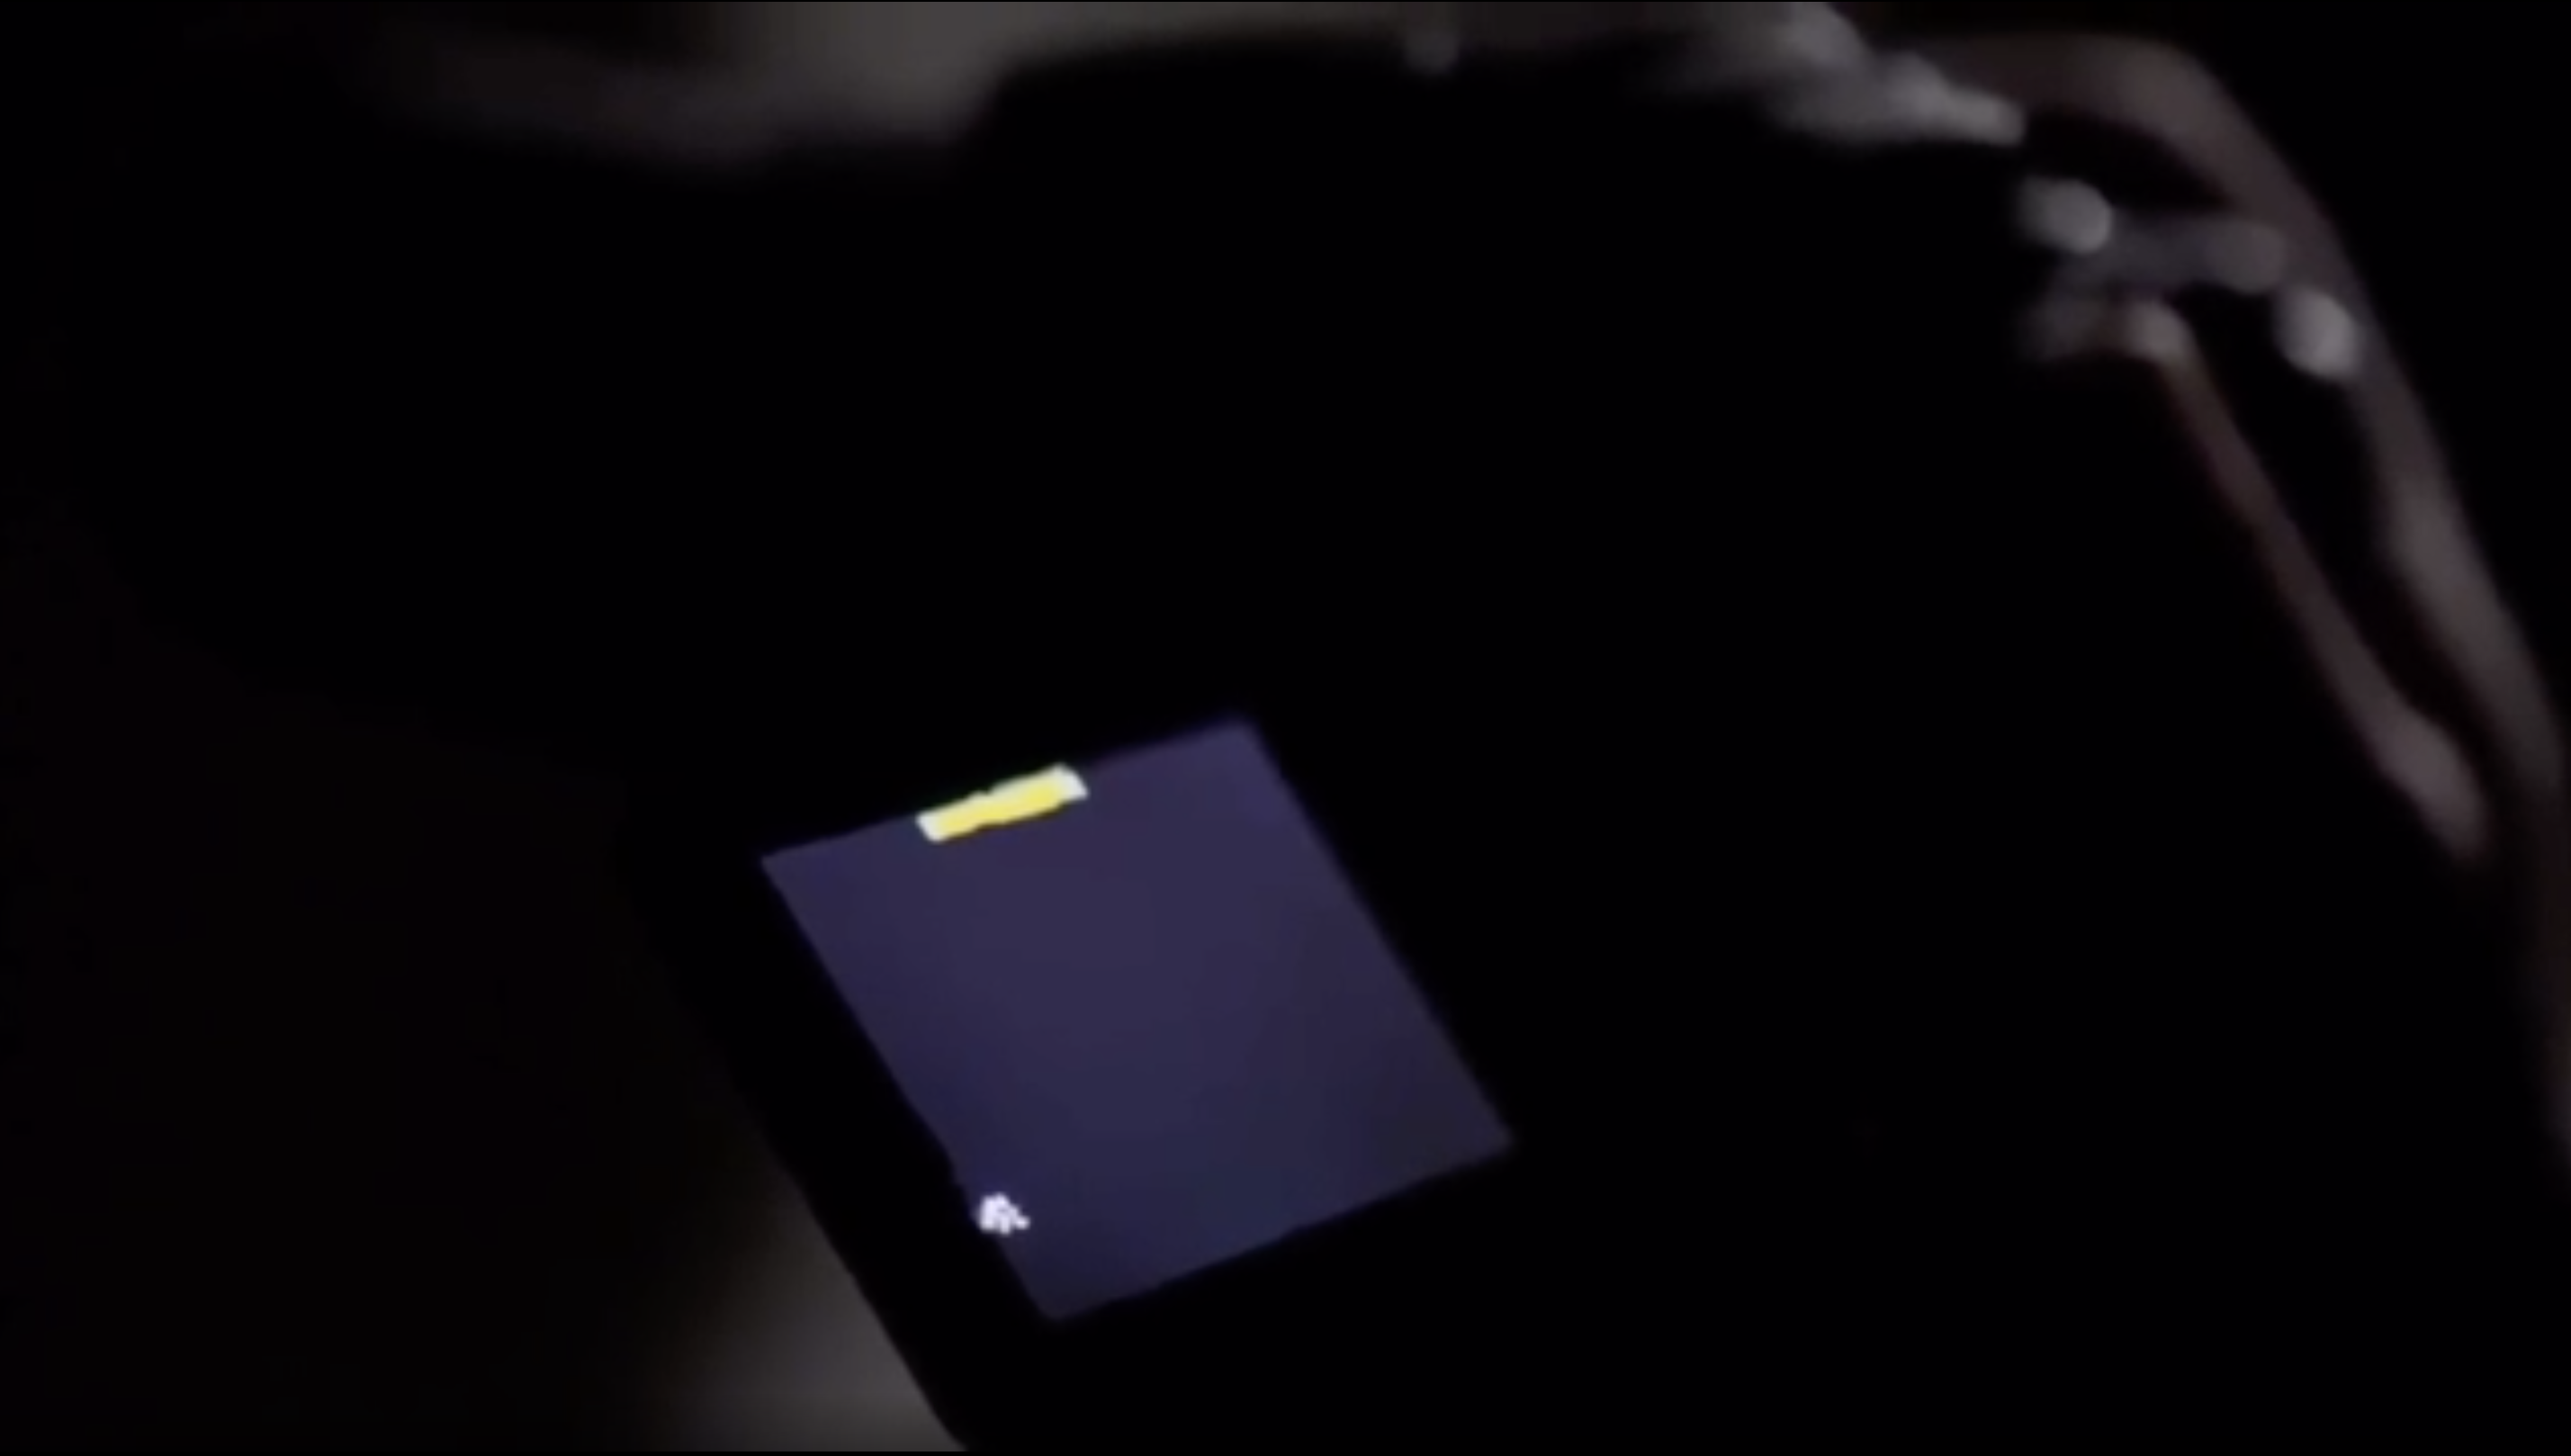 A screenshot of the device being used to receive the light, which shows it being blank for this part of the experiment